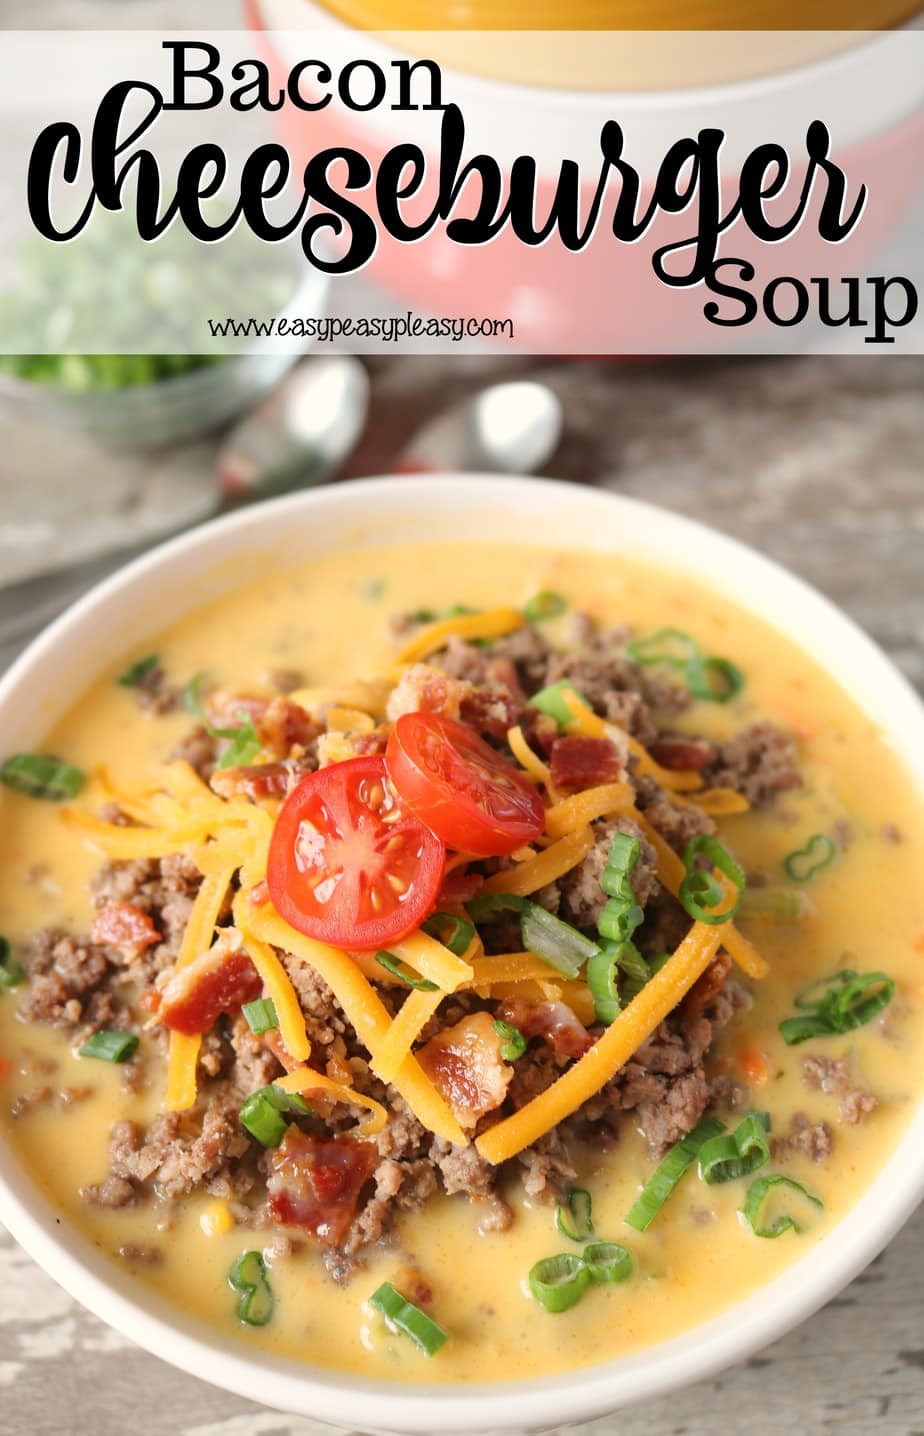 Check out this easy meal prep idea using this creamy and delicious Bacon Cheeseburger Soup recipe. Freezer meal perfect 4 ways to serve and eat!